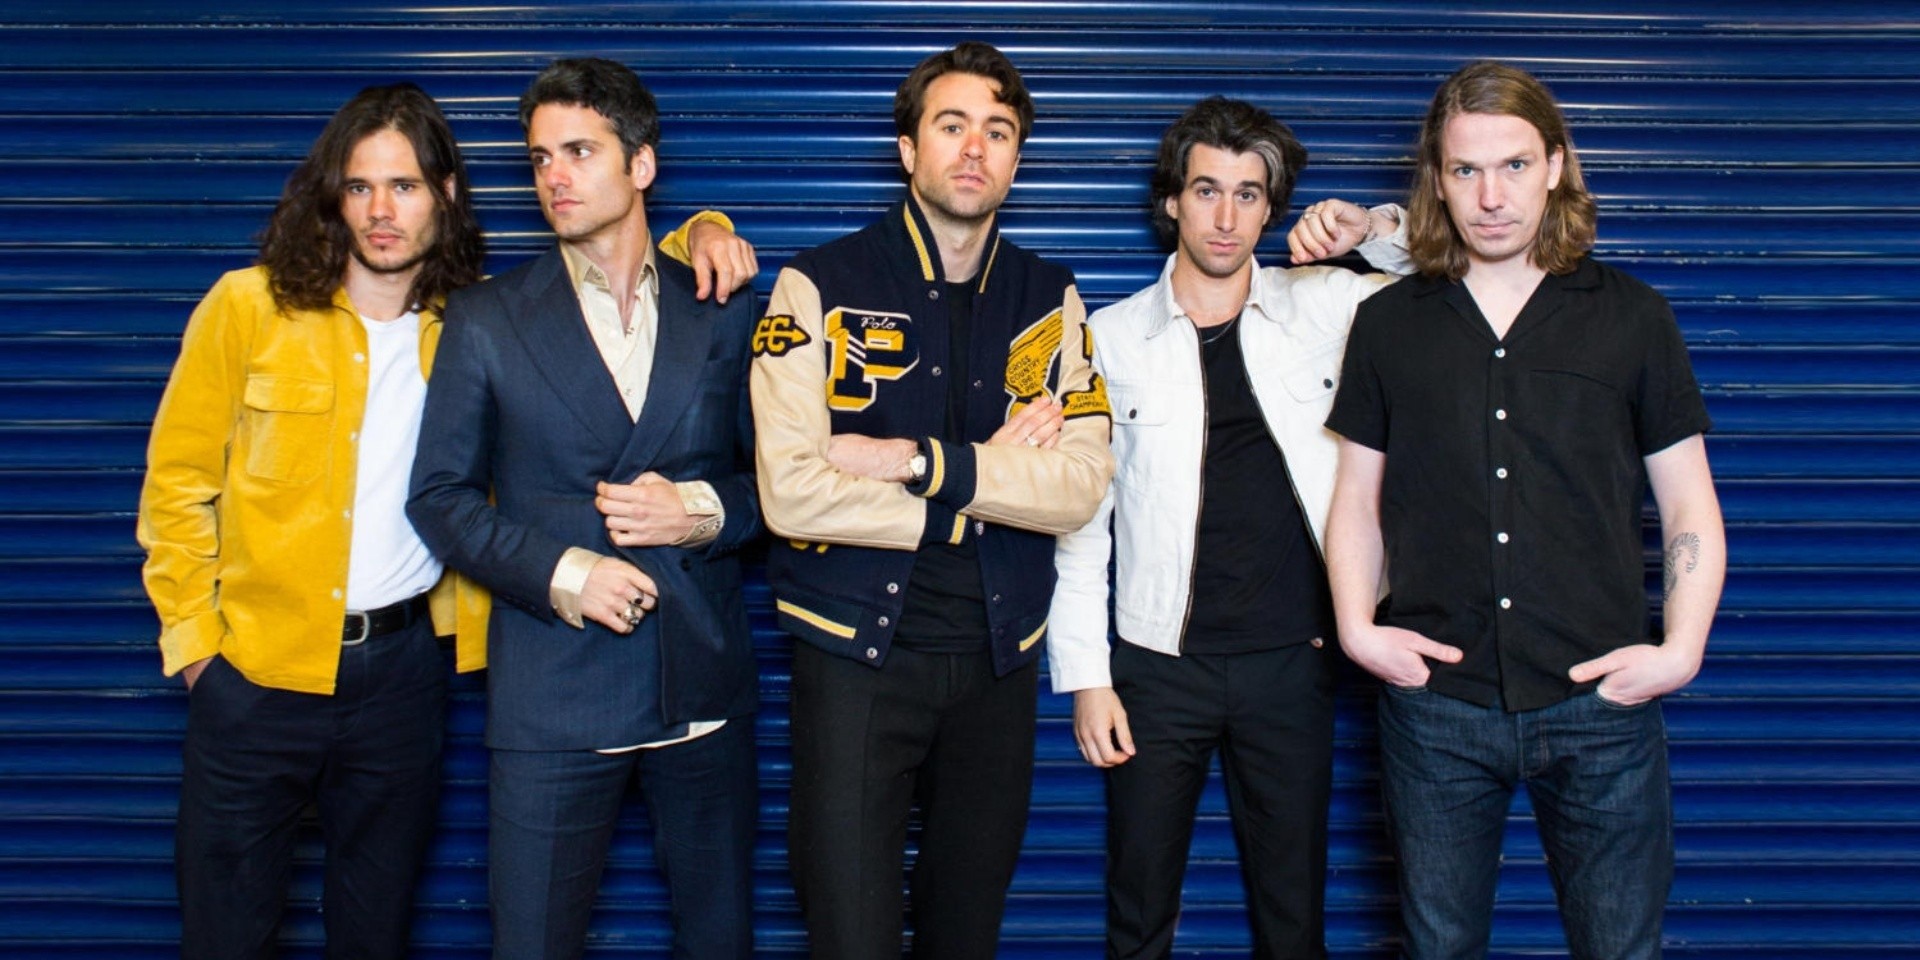 The Vaccines release catchy new single 'All My Friends Are Falling In Love' - listen